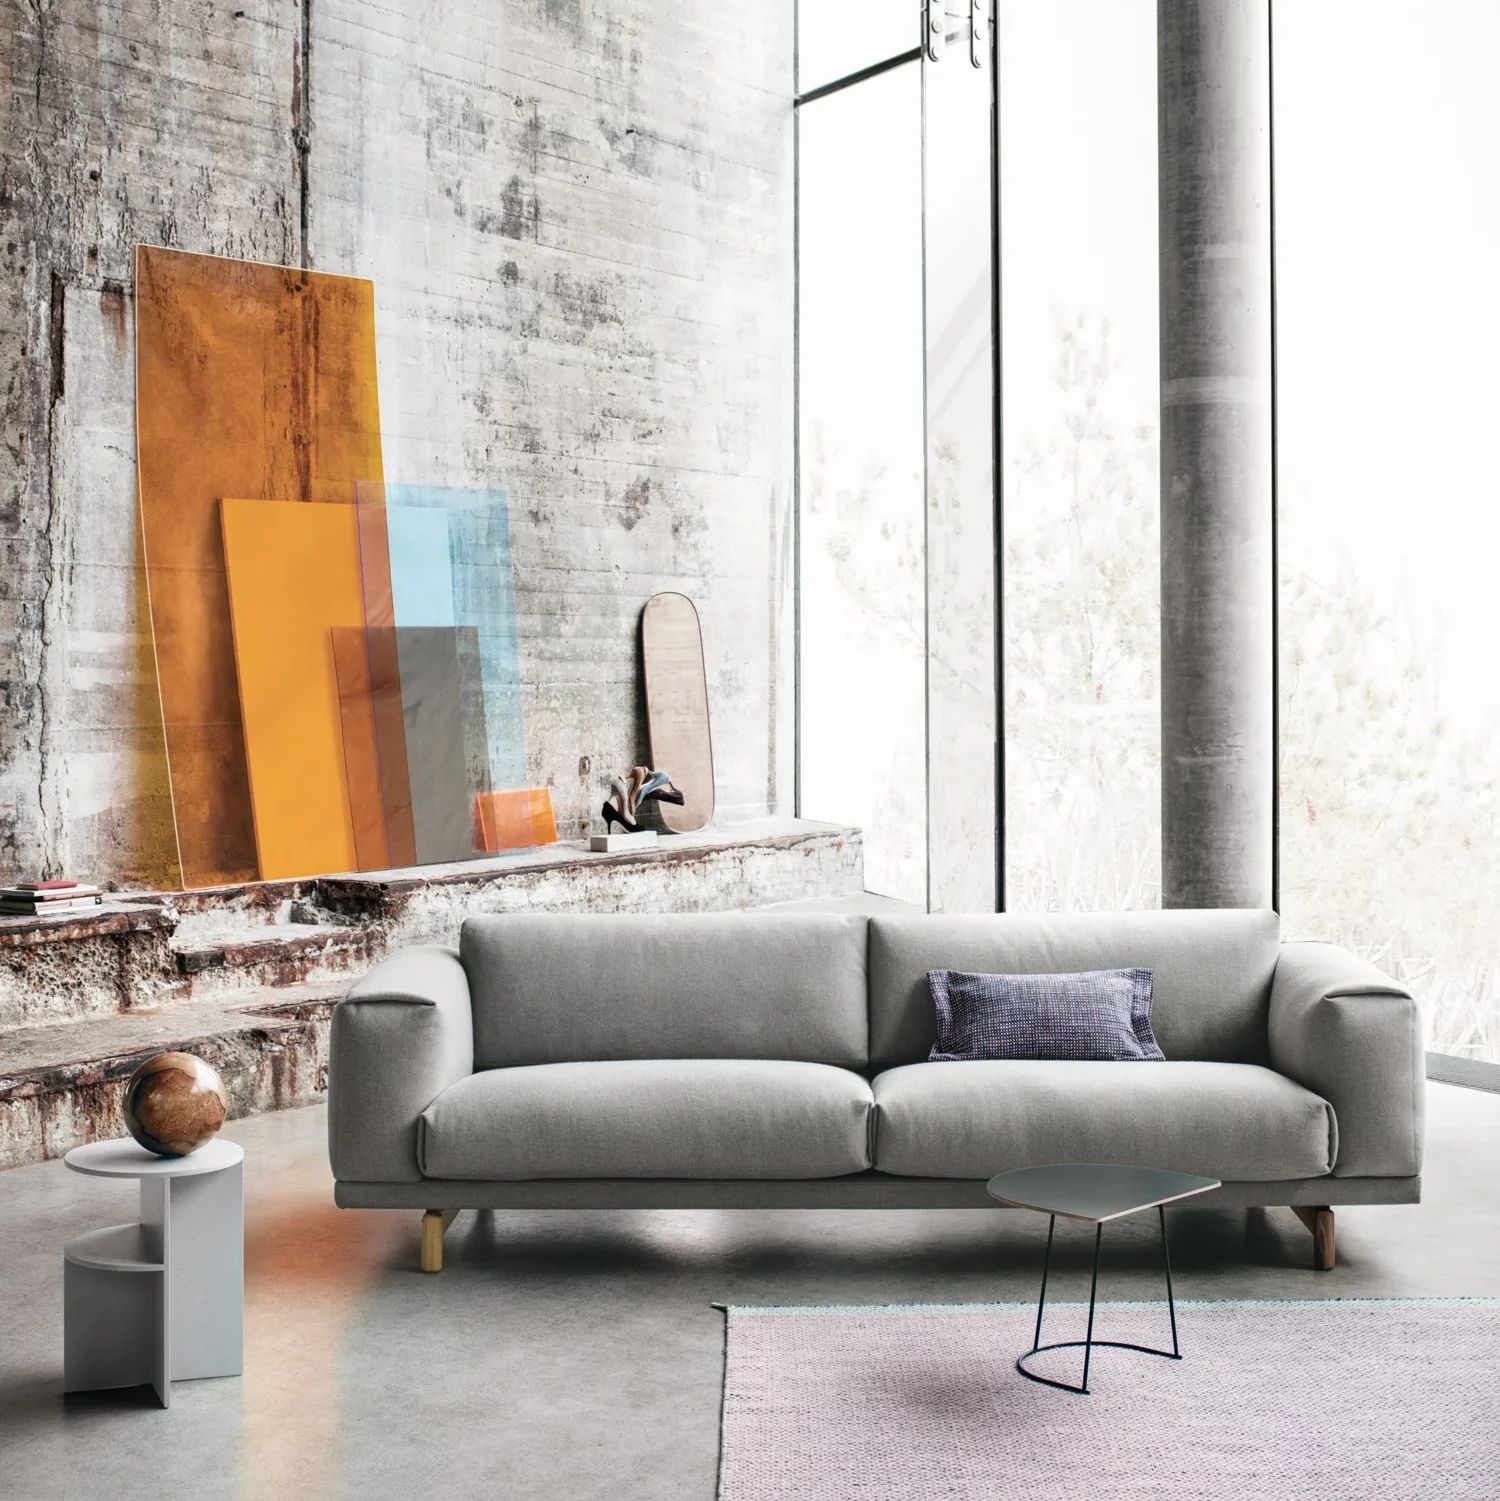 A modern living room with an industrial vibe. The space features a grey sofa adorned with a single purple pillow. In front of the sofa is a minimalistic black metal round table. On the left, against a rustic concrete wall, are large panels of abstract artwork displaying gradients of orange, blue, and brown. A mirror with a rounded top is leaned against the same wall. 